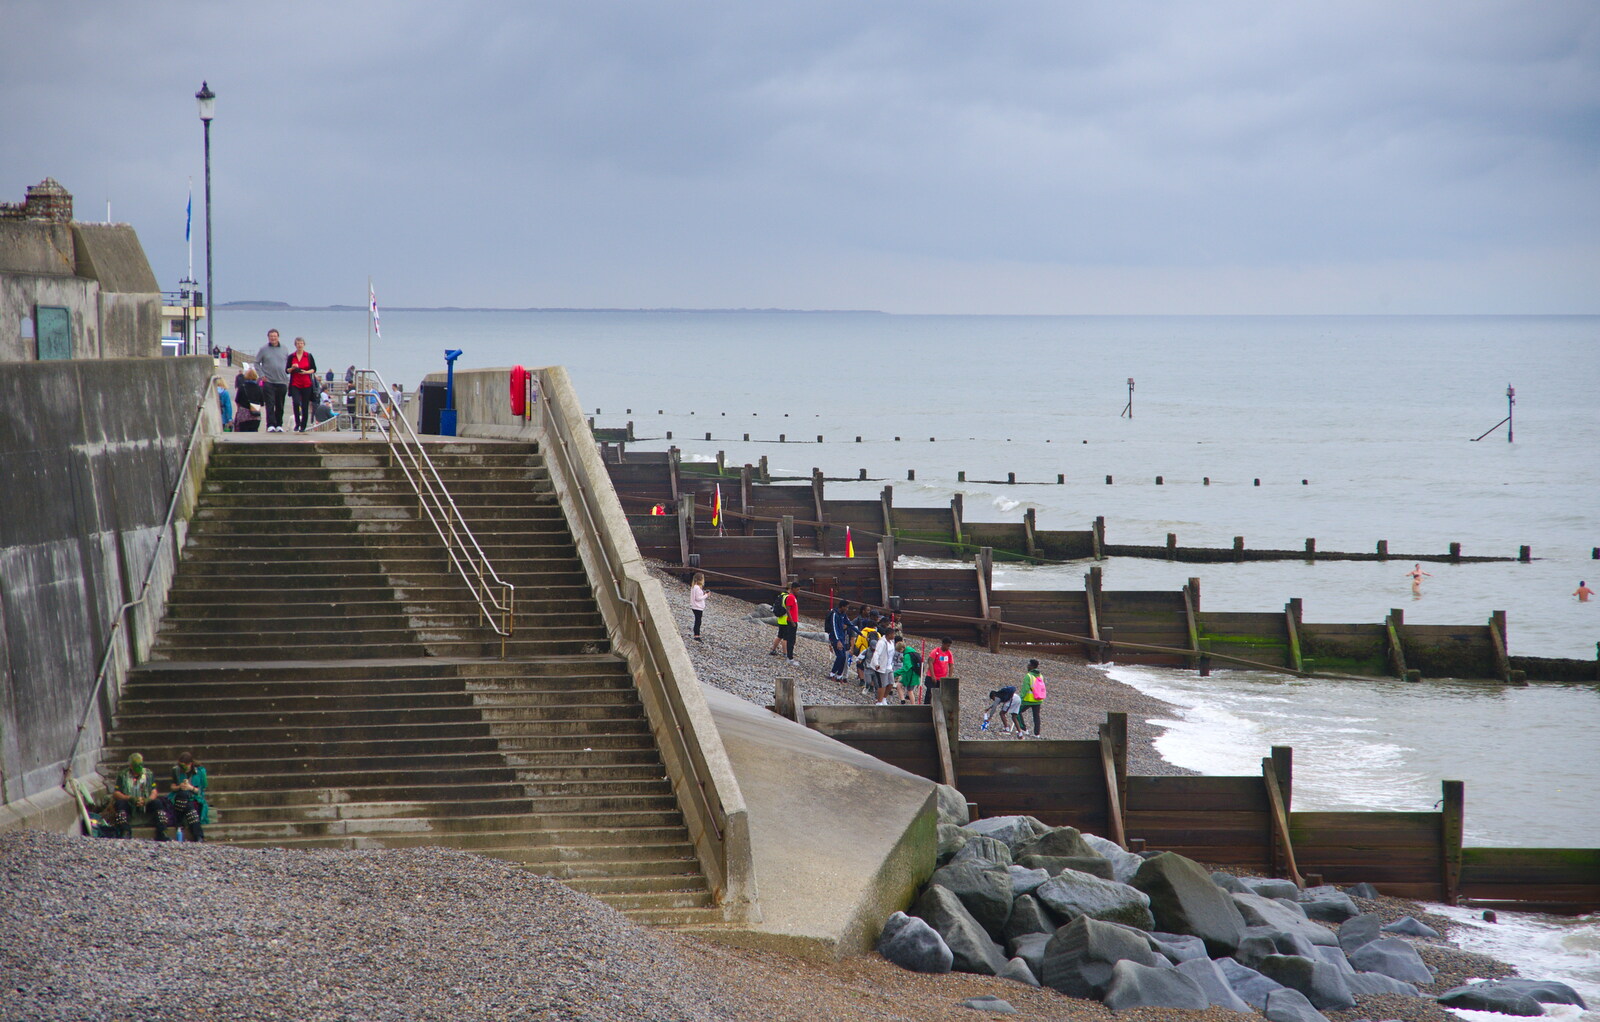 Sheringham's sea defences from Kelling Camping and the Potty Morris Festival, Sheringham, North Norfolk - 6th July 2019